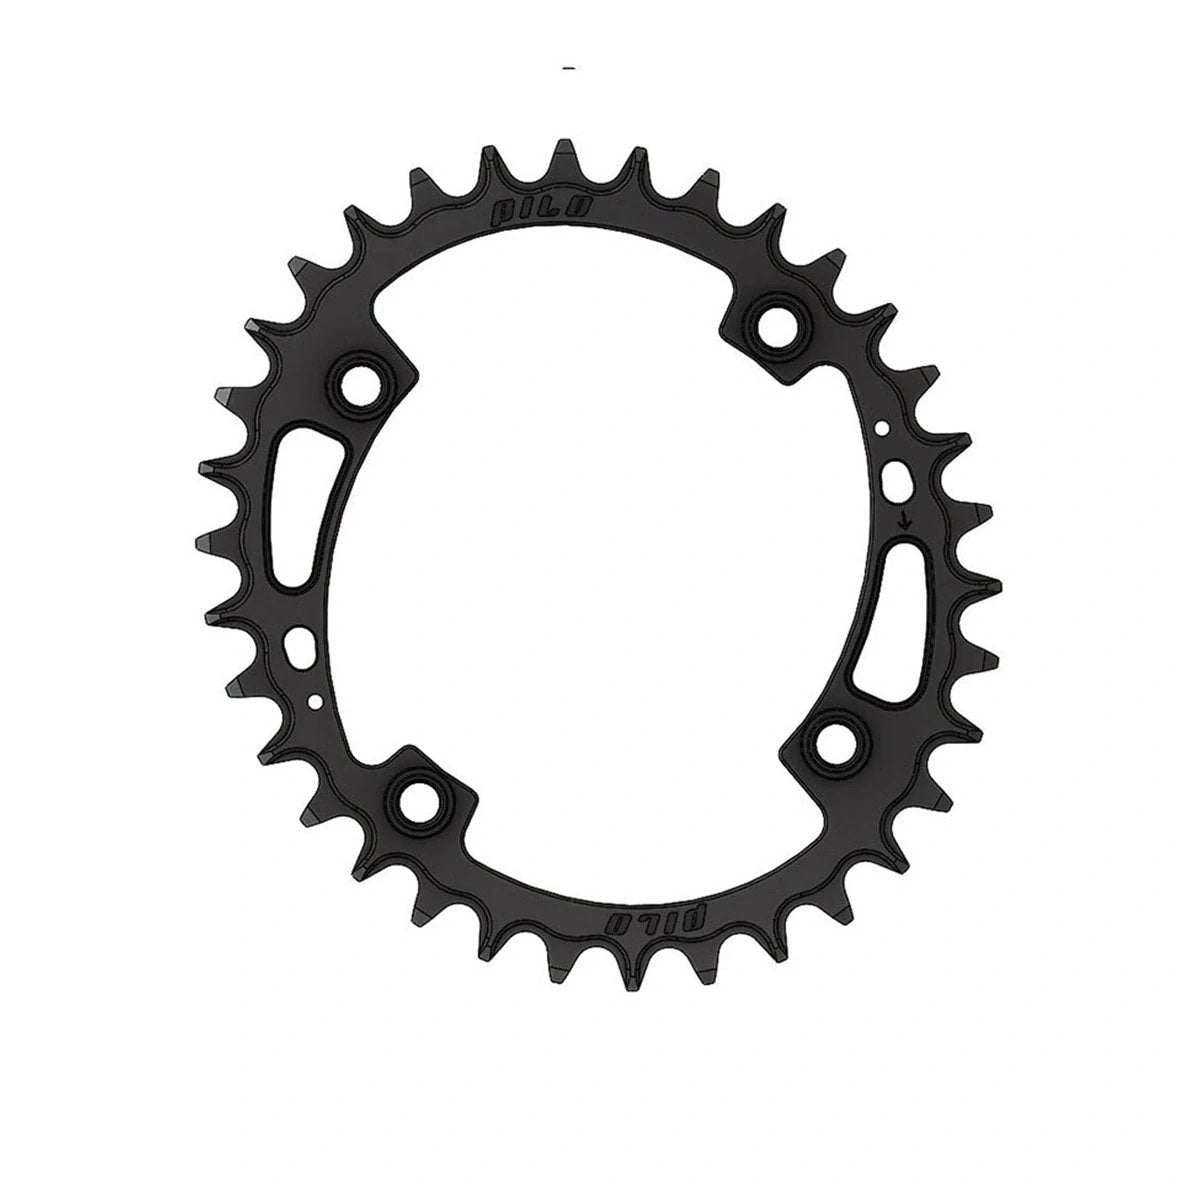 Pilo 34T 104Bcd Chainring - High Quality Crank Replacement